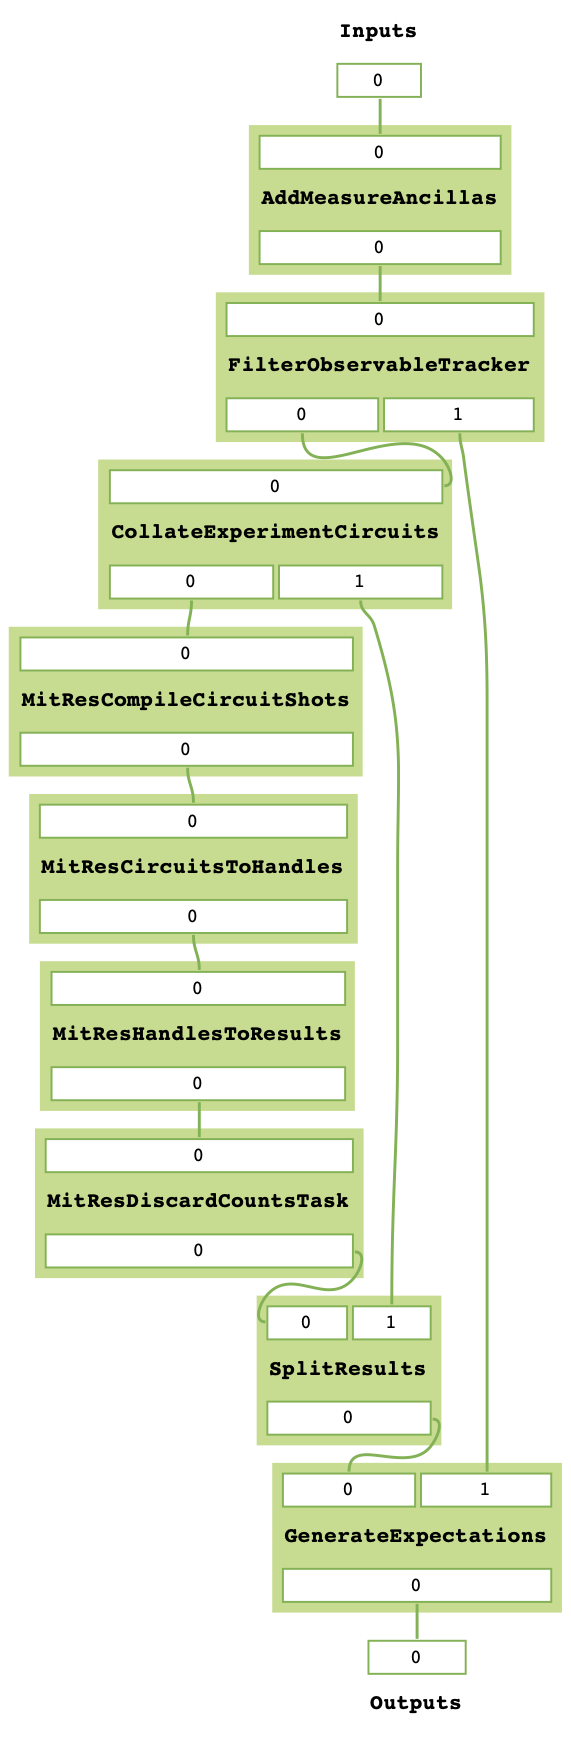 _images/combined_mitex_taskgraph.png